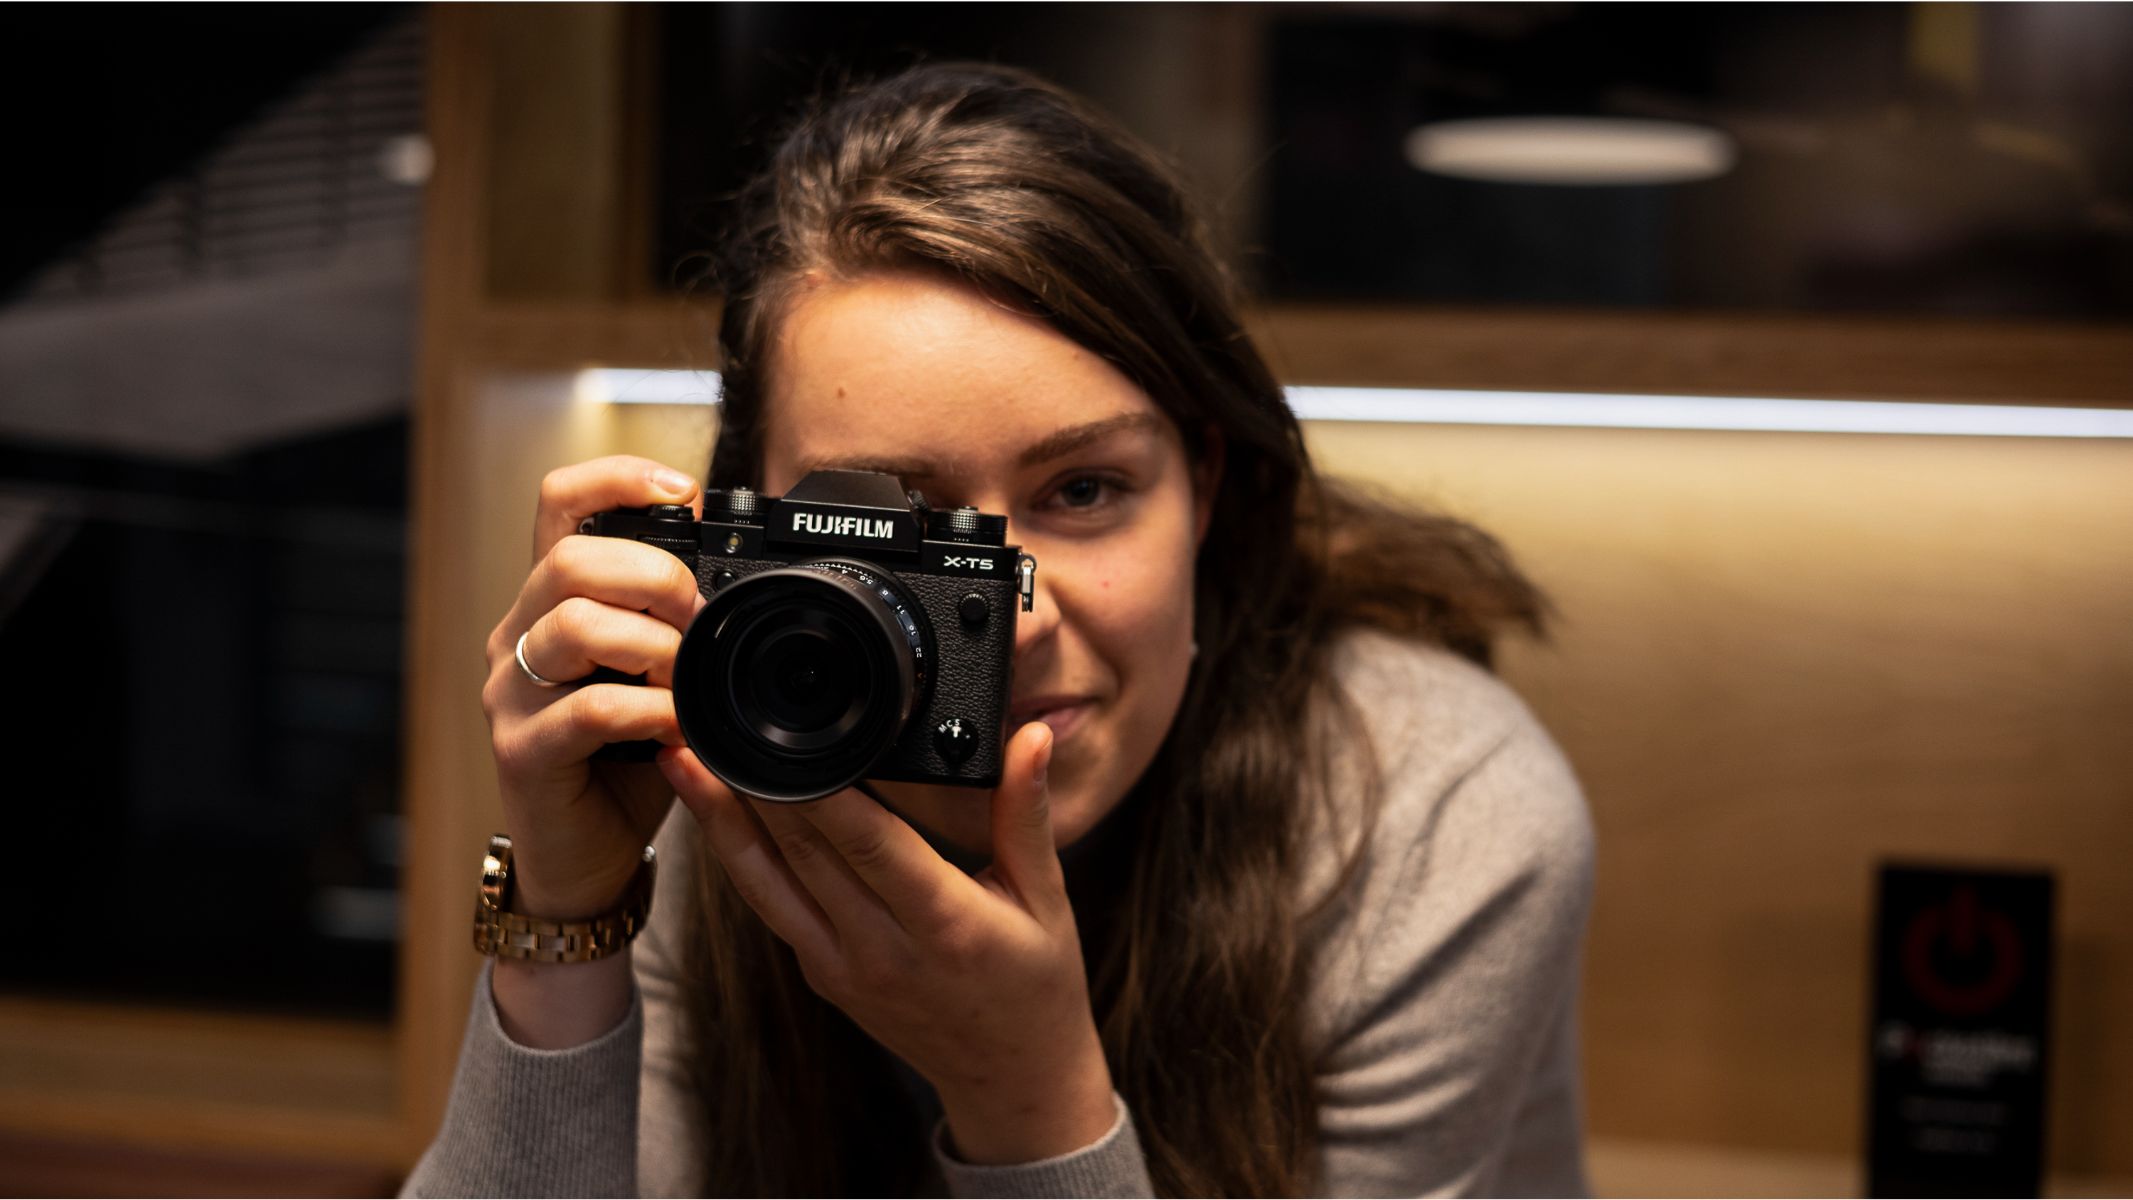 Fujifilm X-T5 in-hand and in use